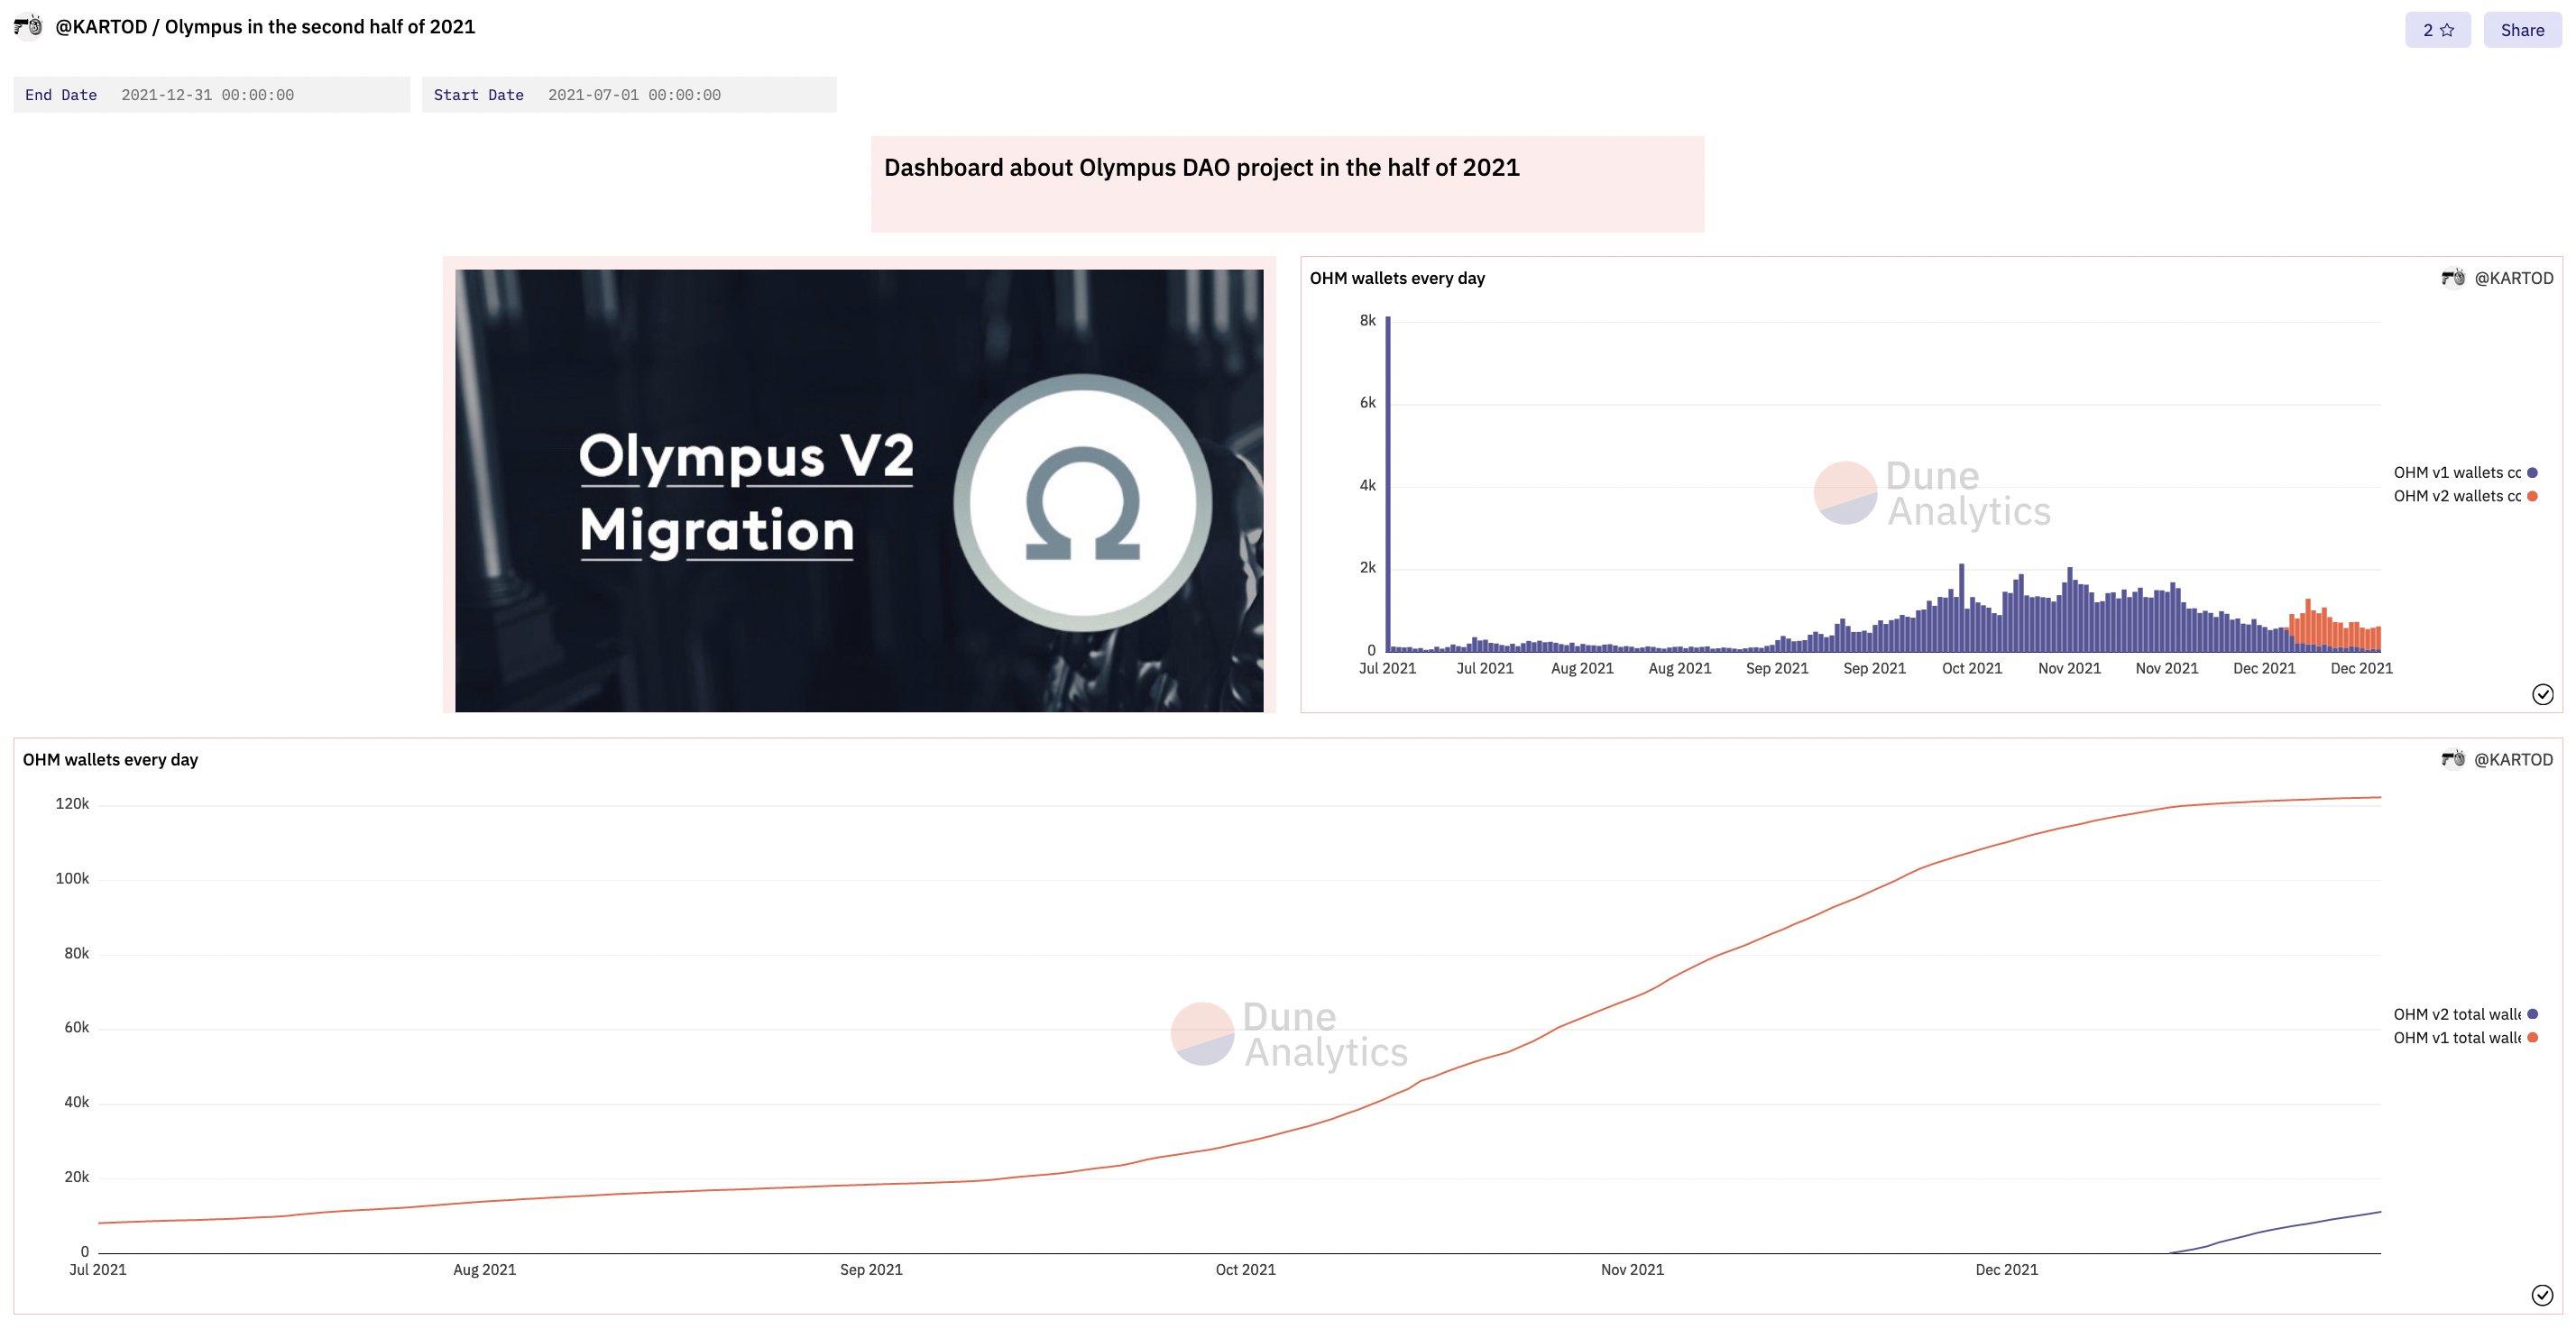 Link for the complete dashboard from KARTOD: https://dune.xyz/KARTOD/Olympus-in-the-second-half-of-2021